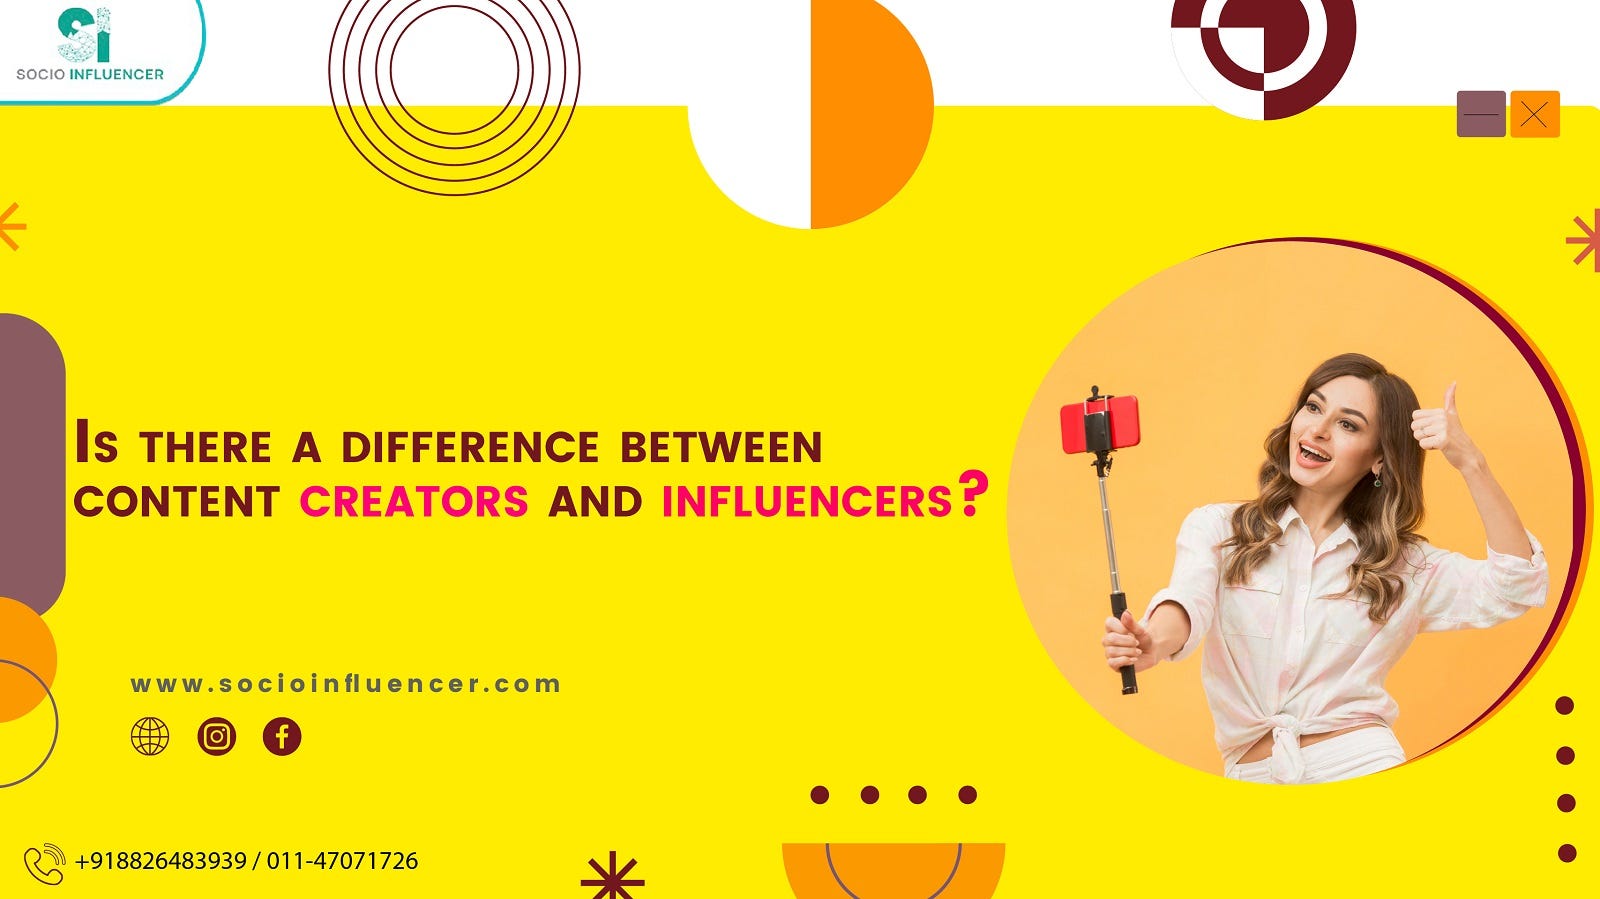 What Is the Difference Between Content Creators and Influencers?